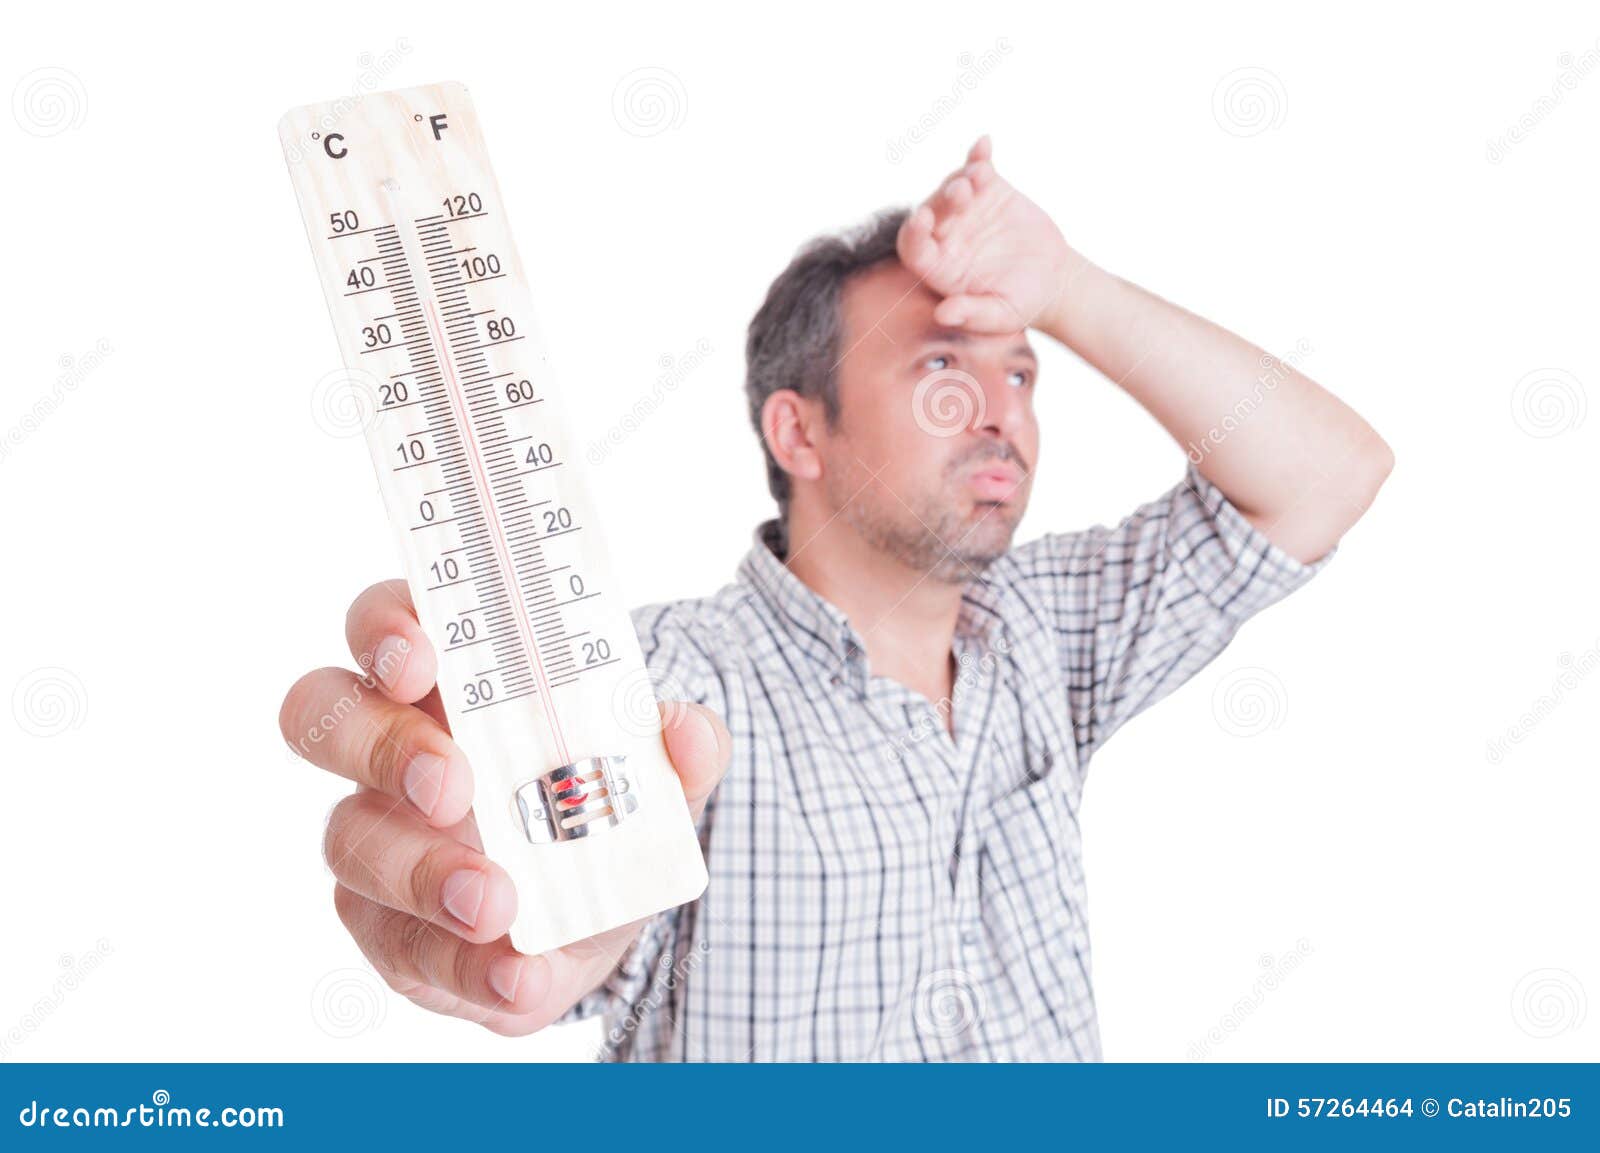 sumer heat and heatwave concept with man holding thermometer